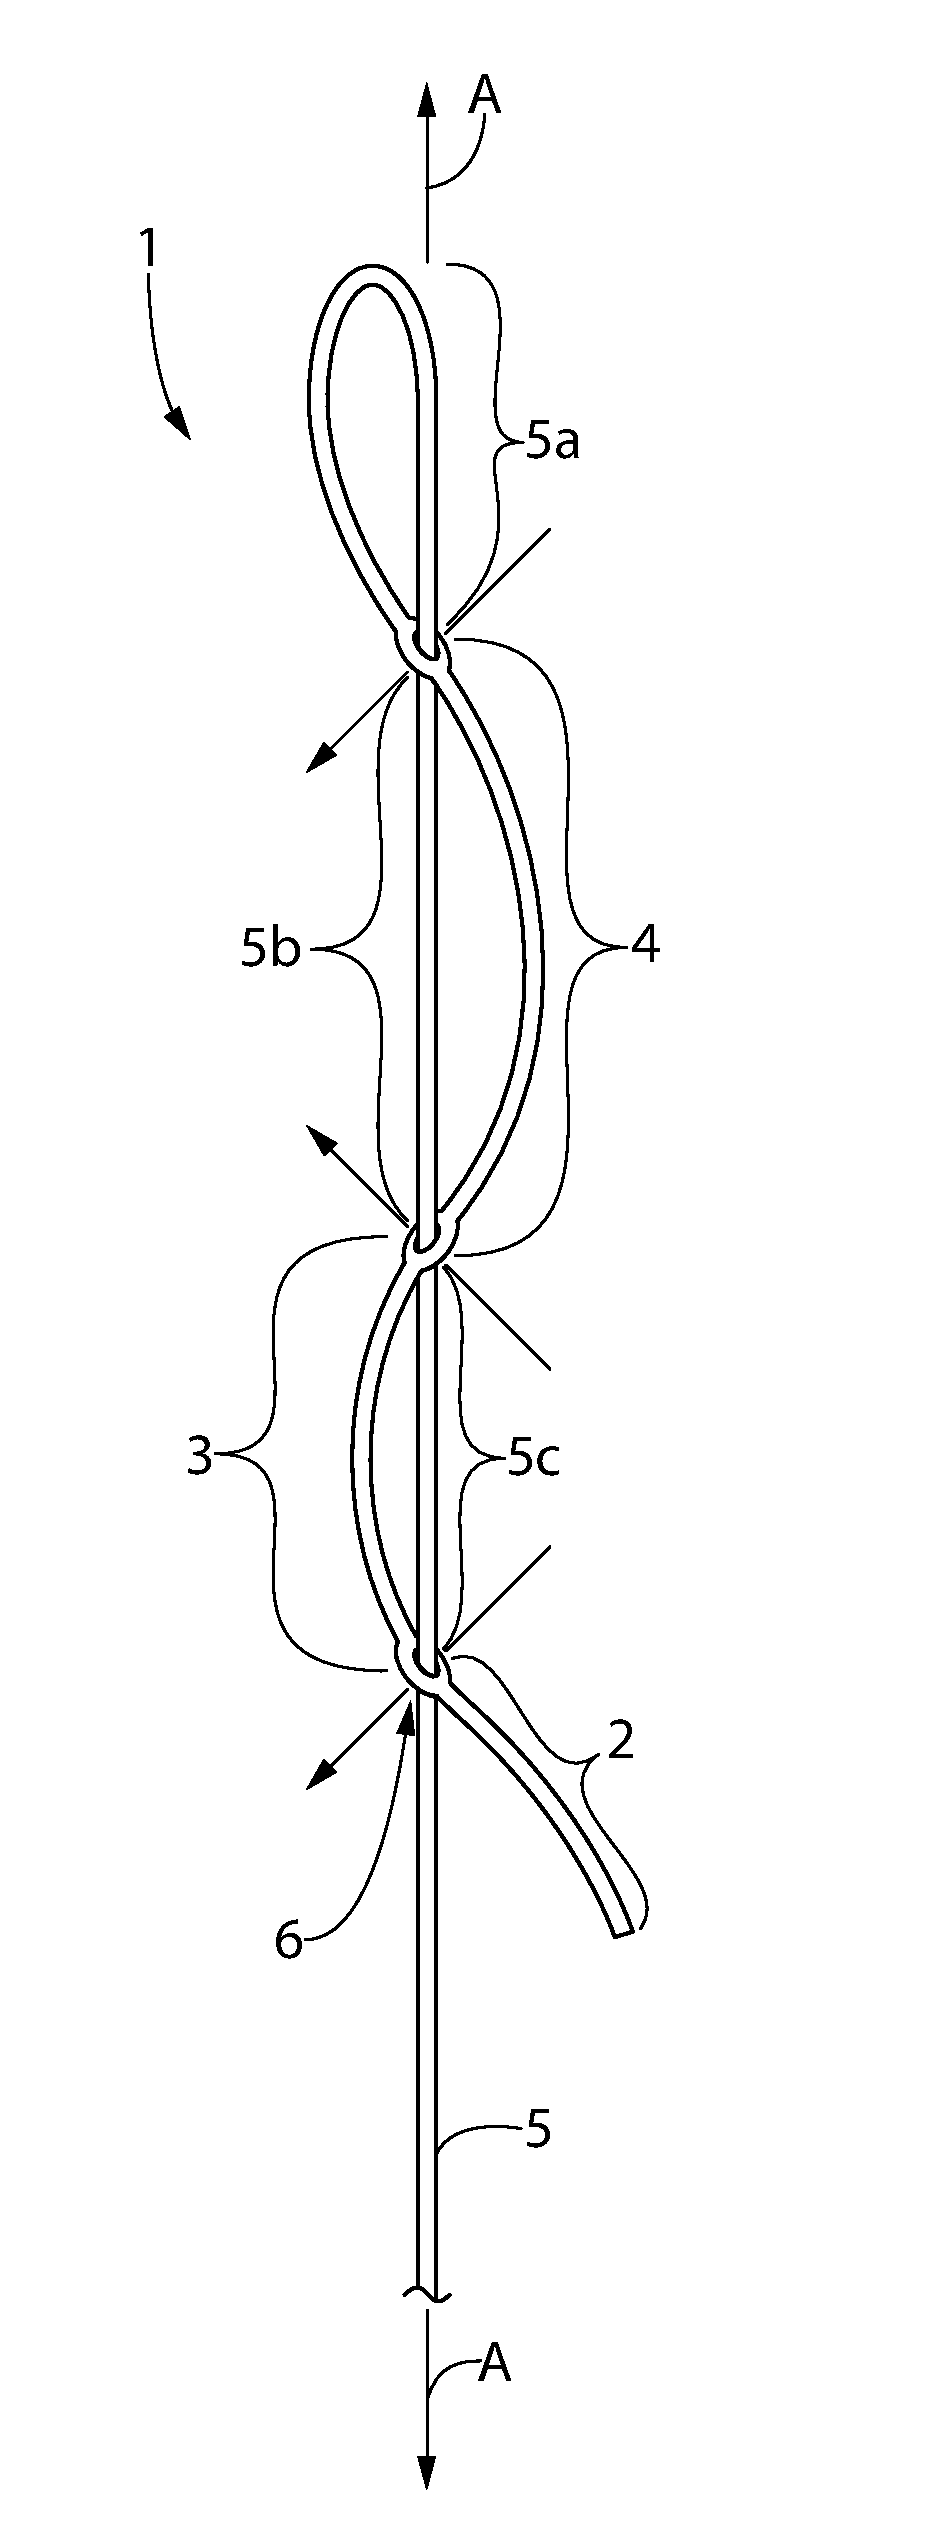 Expanding suture knot anchor and device for placement of same